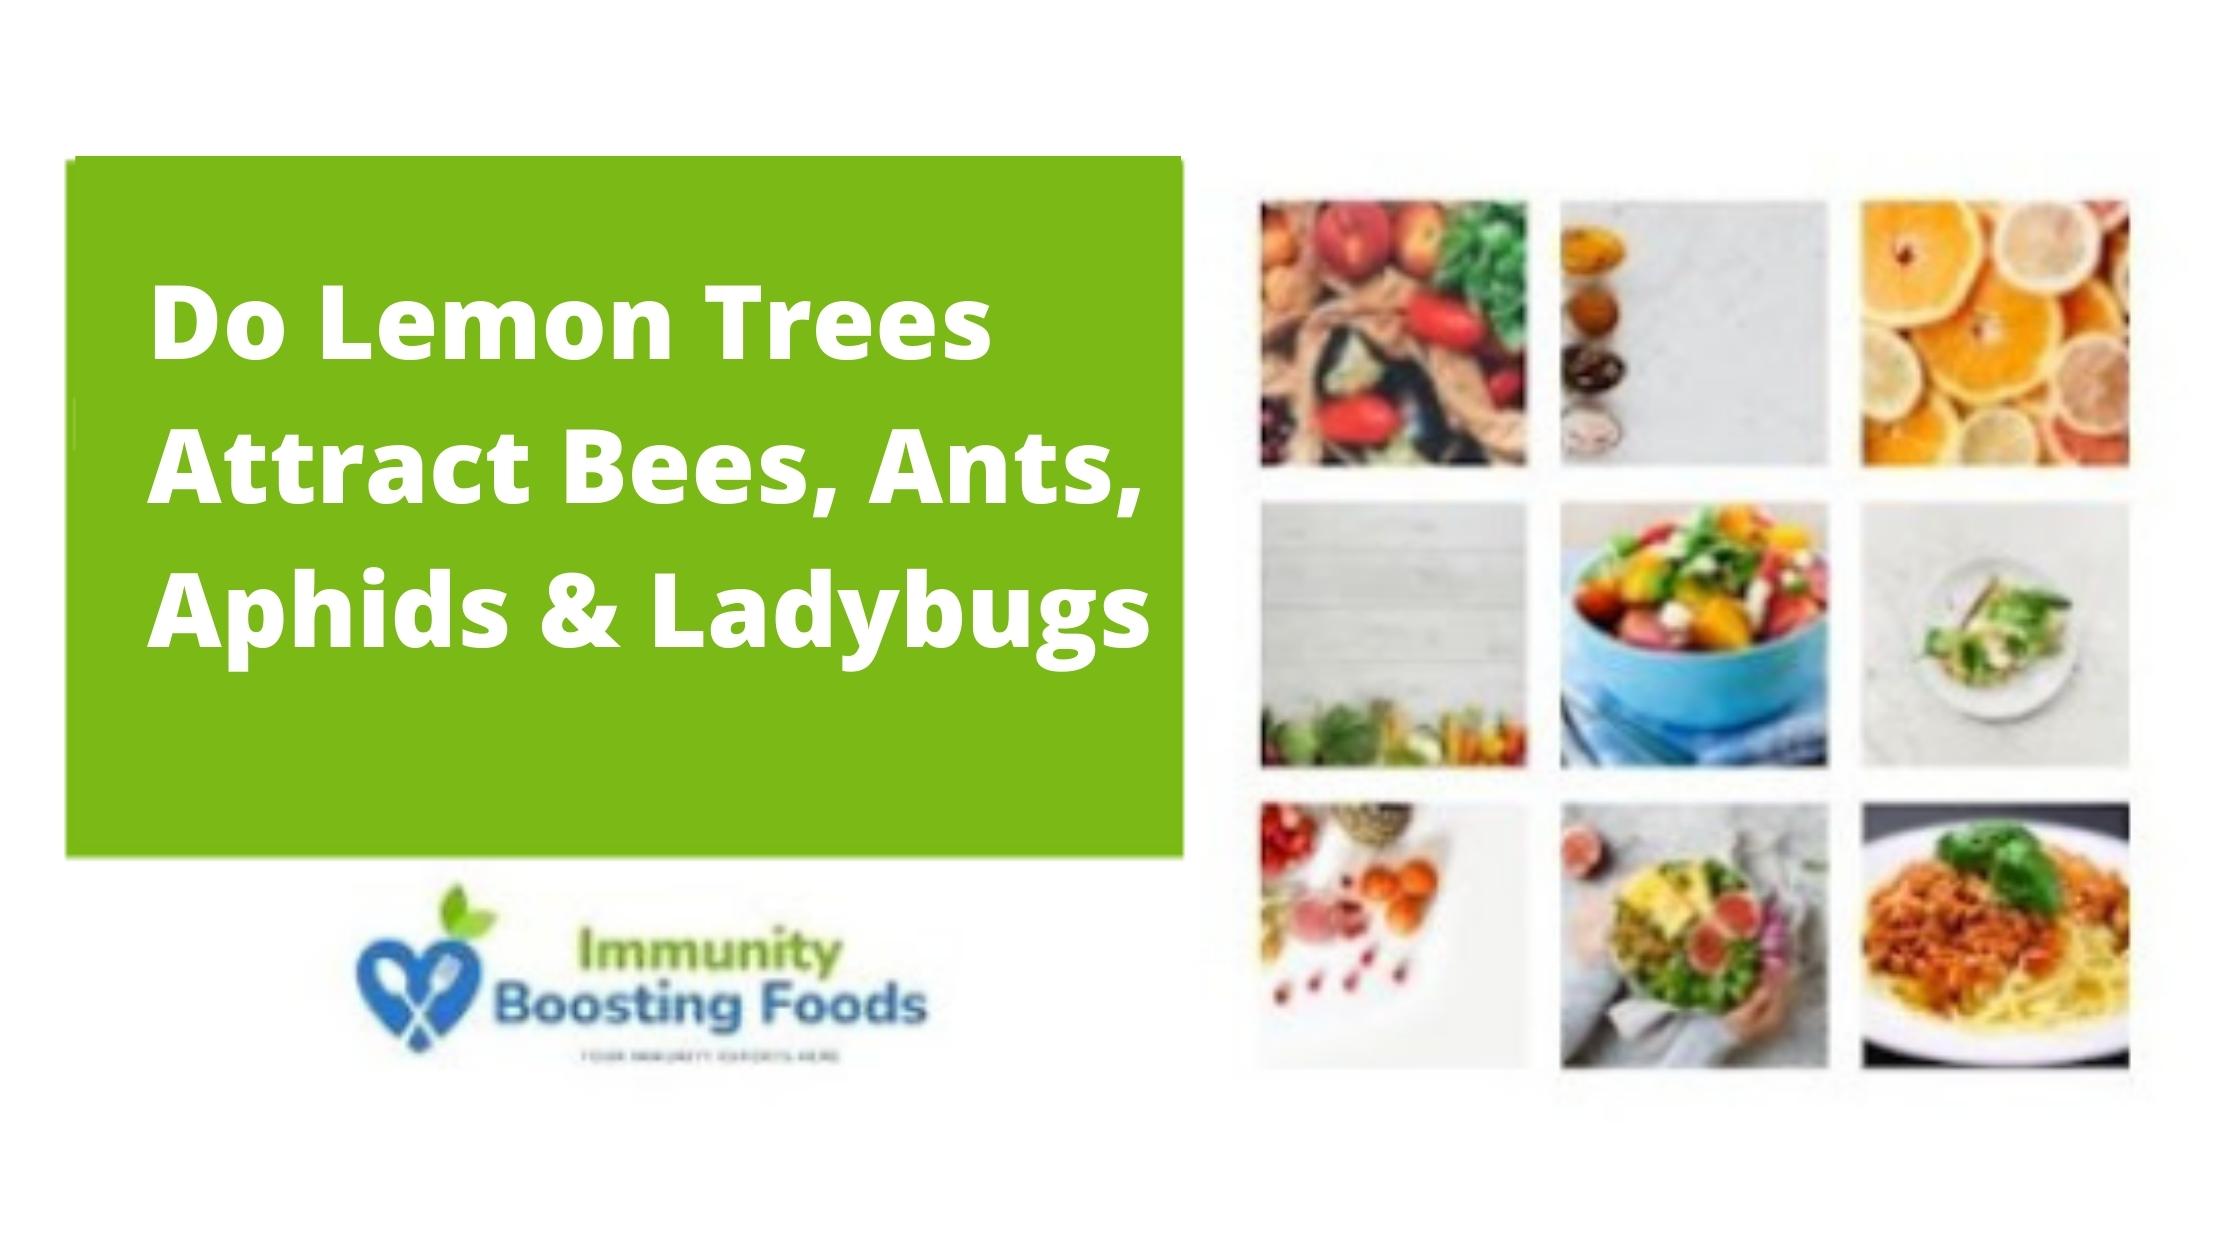 Do Lemon Trees Attract Bees, Ants, Aphids & Ladybugs